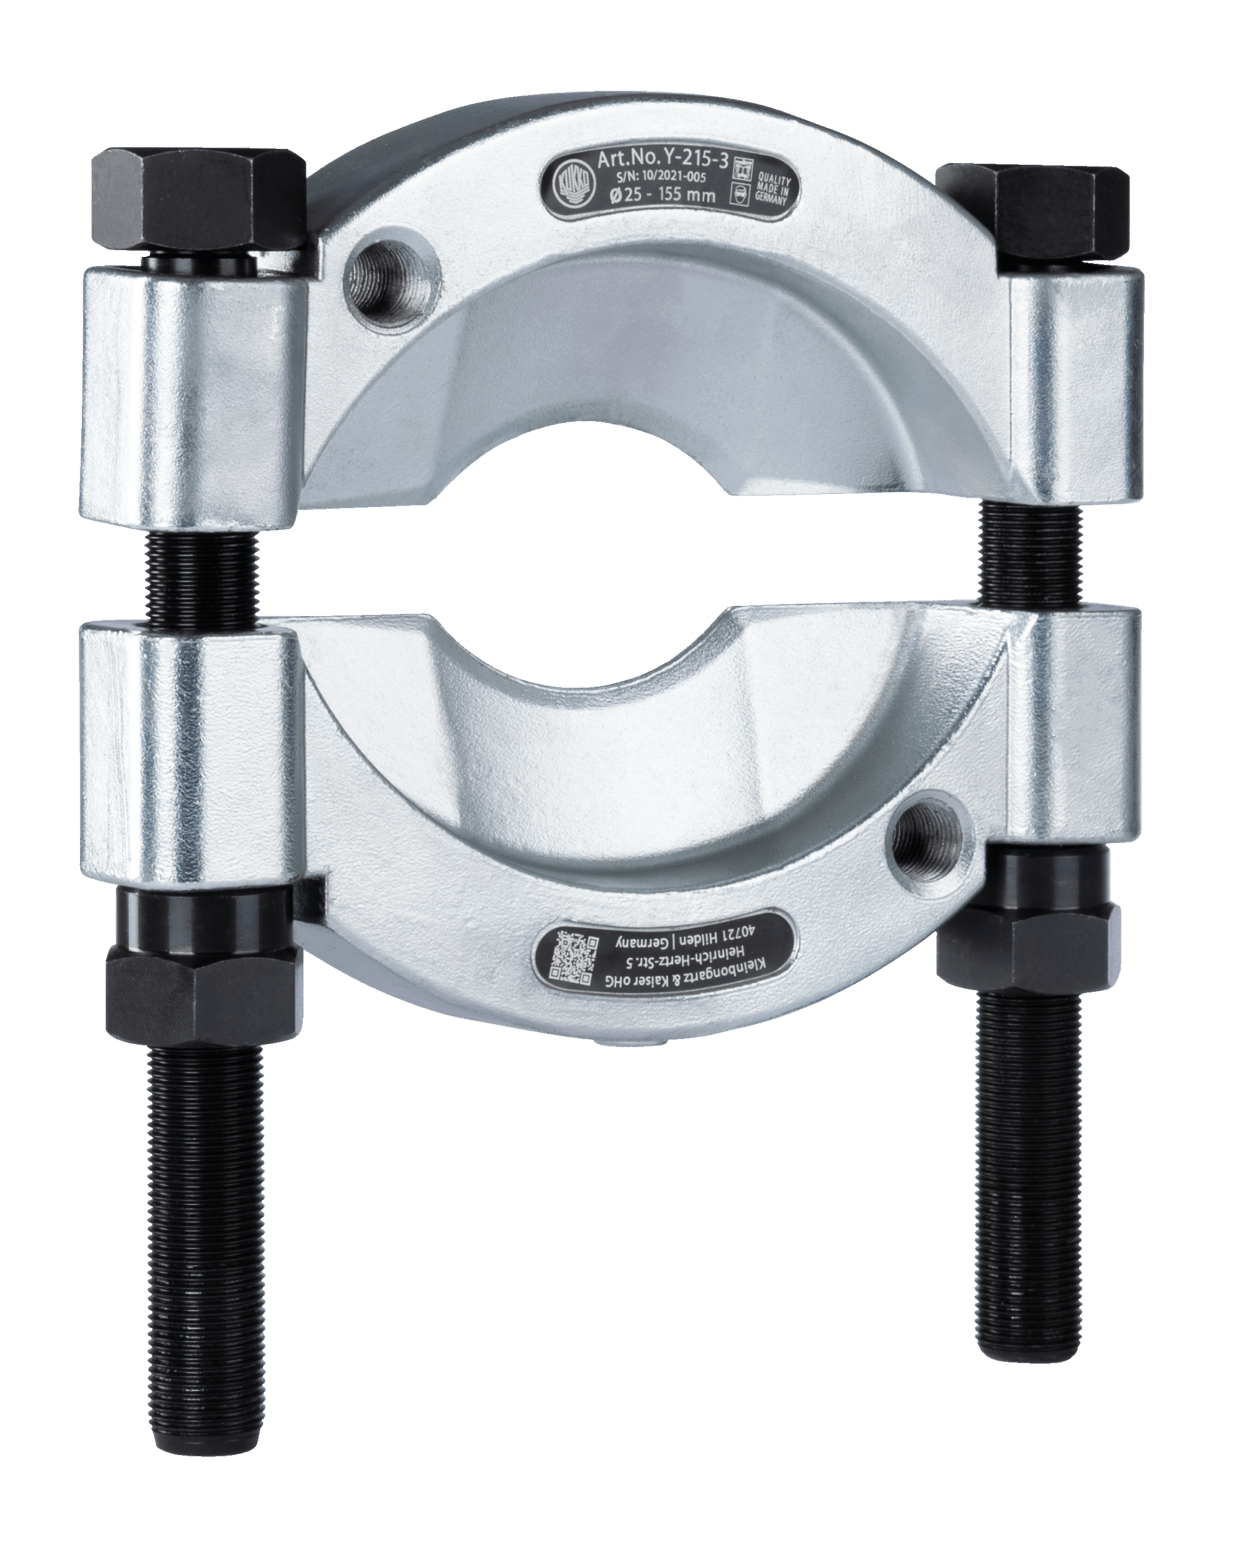 Kukko Y-315-4 Disconnecting device for hydraulic puller/puller - Apollo Industries llc